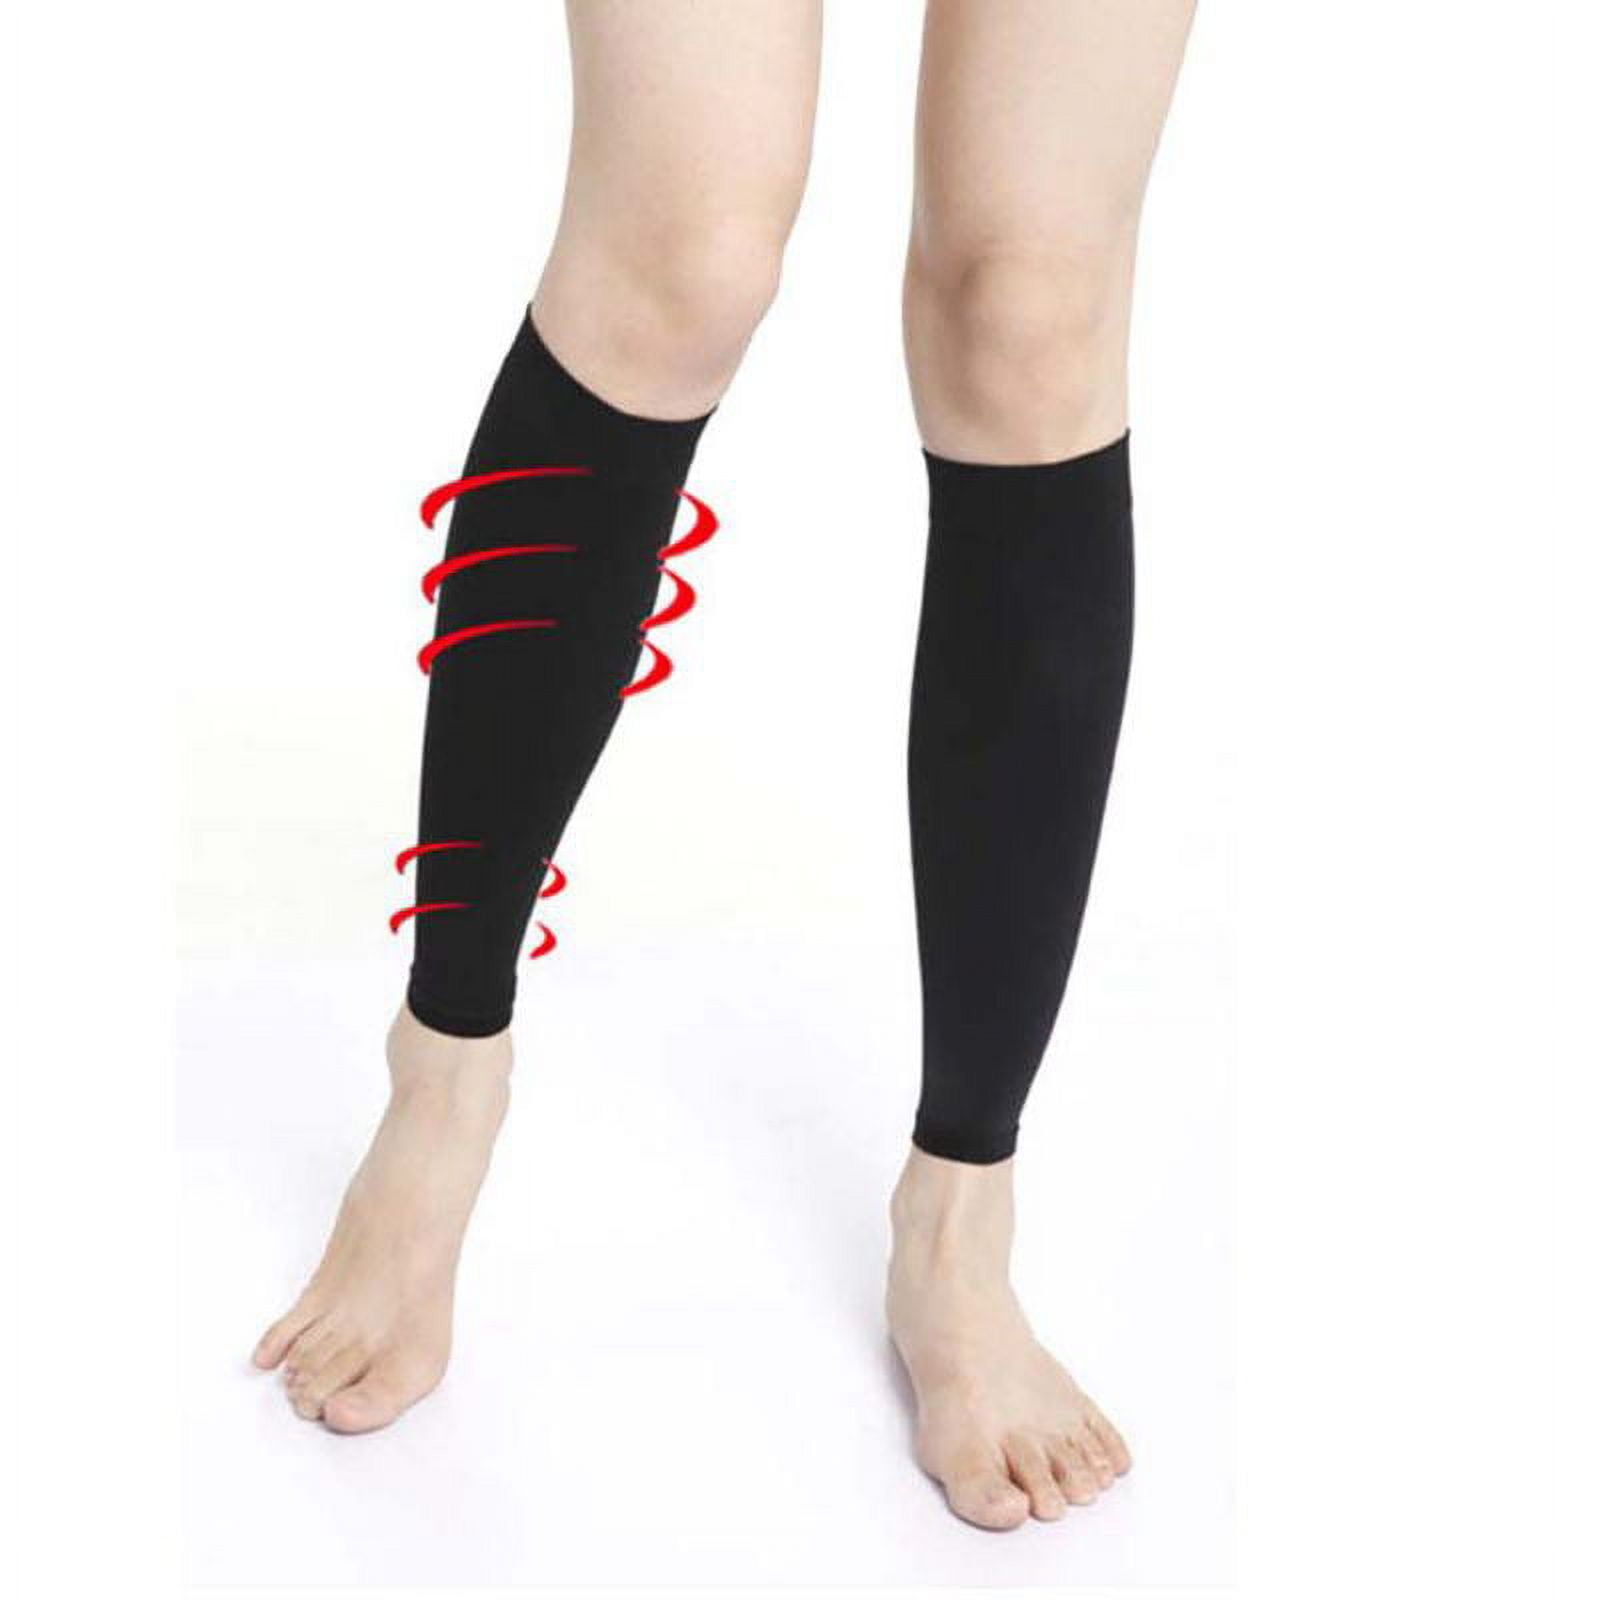 Flamingo calf support bandage XL  Ortho Doctors Approved calf compression  sleeve